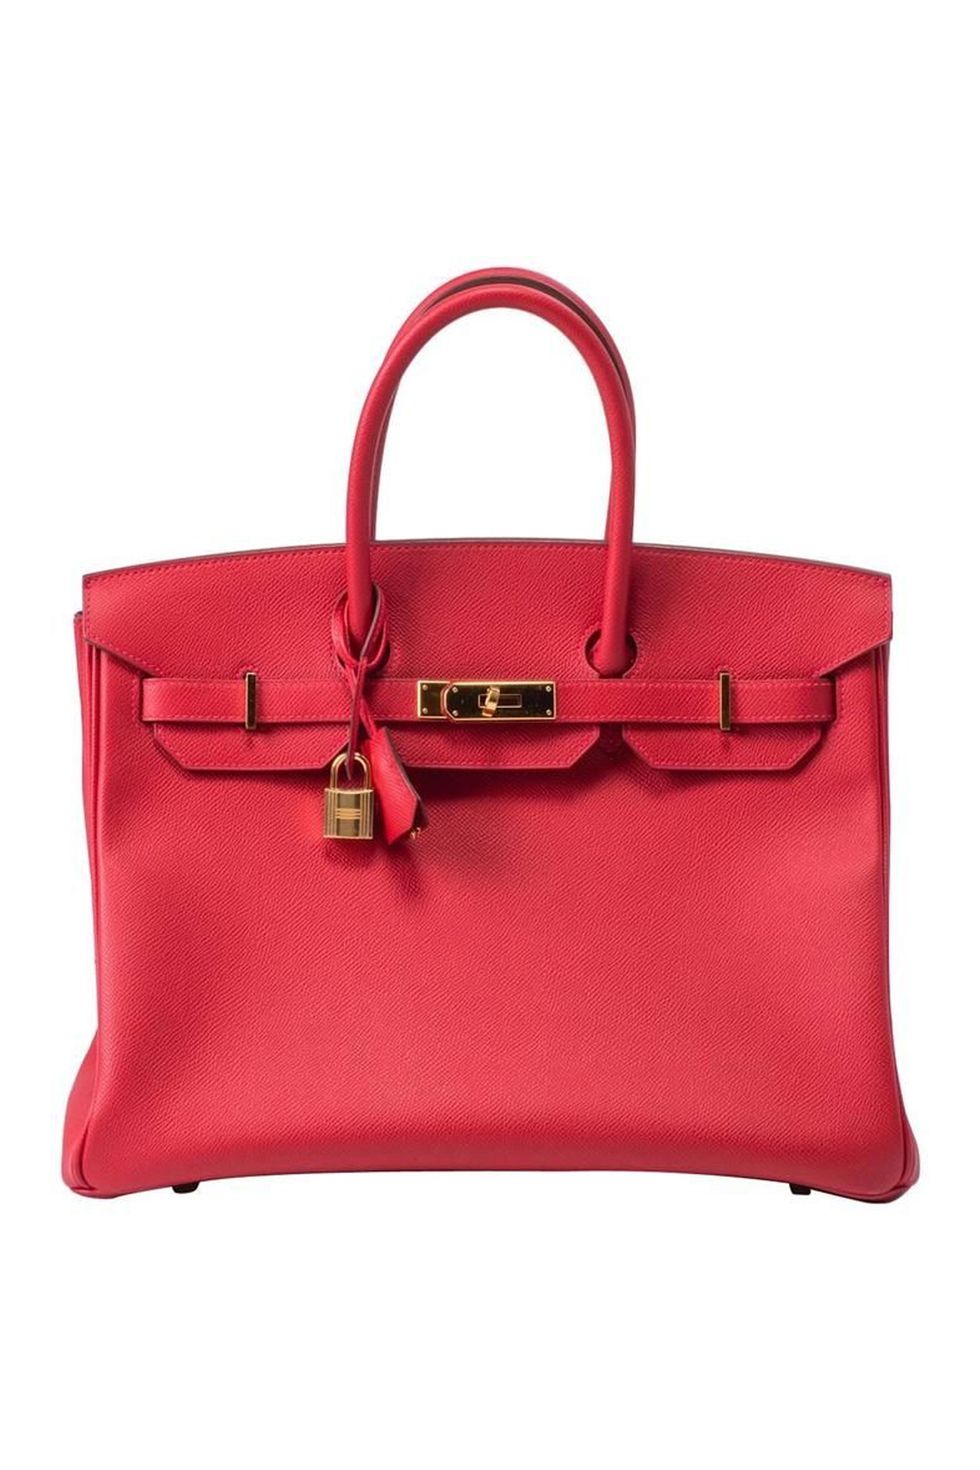 Designer Bags for Women - 12 Handbags and Purses Every Woman Should Own